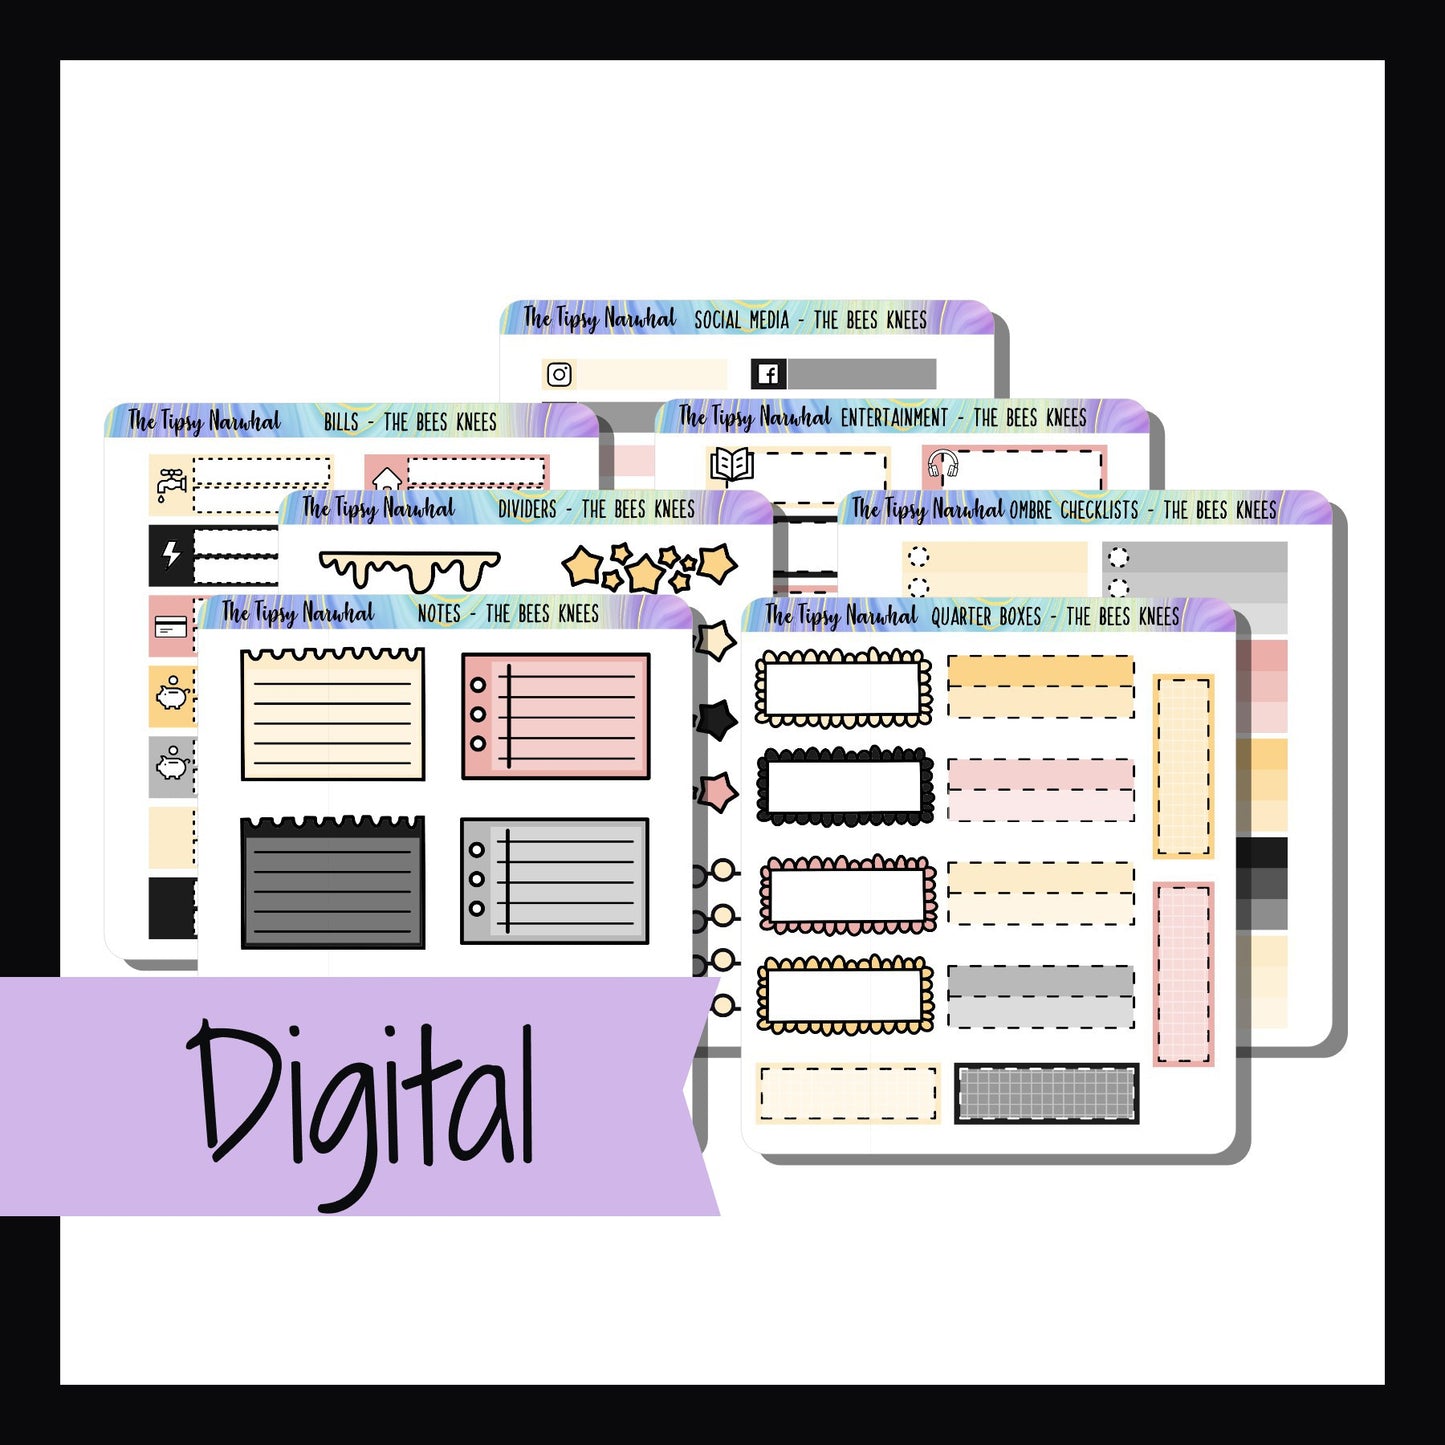 Digital The Bees Knees Functional Add-ons is a digital printable version of The Bees Knees functional add-on sheets.  It is a 7 page kit featuring varied functional stickers that match The Bees Knees weekly kits. 